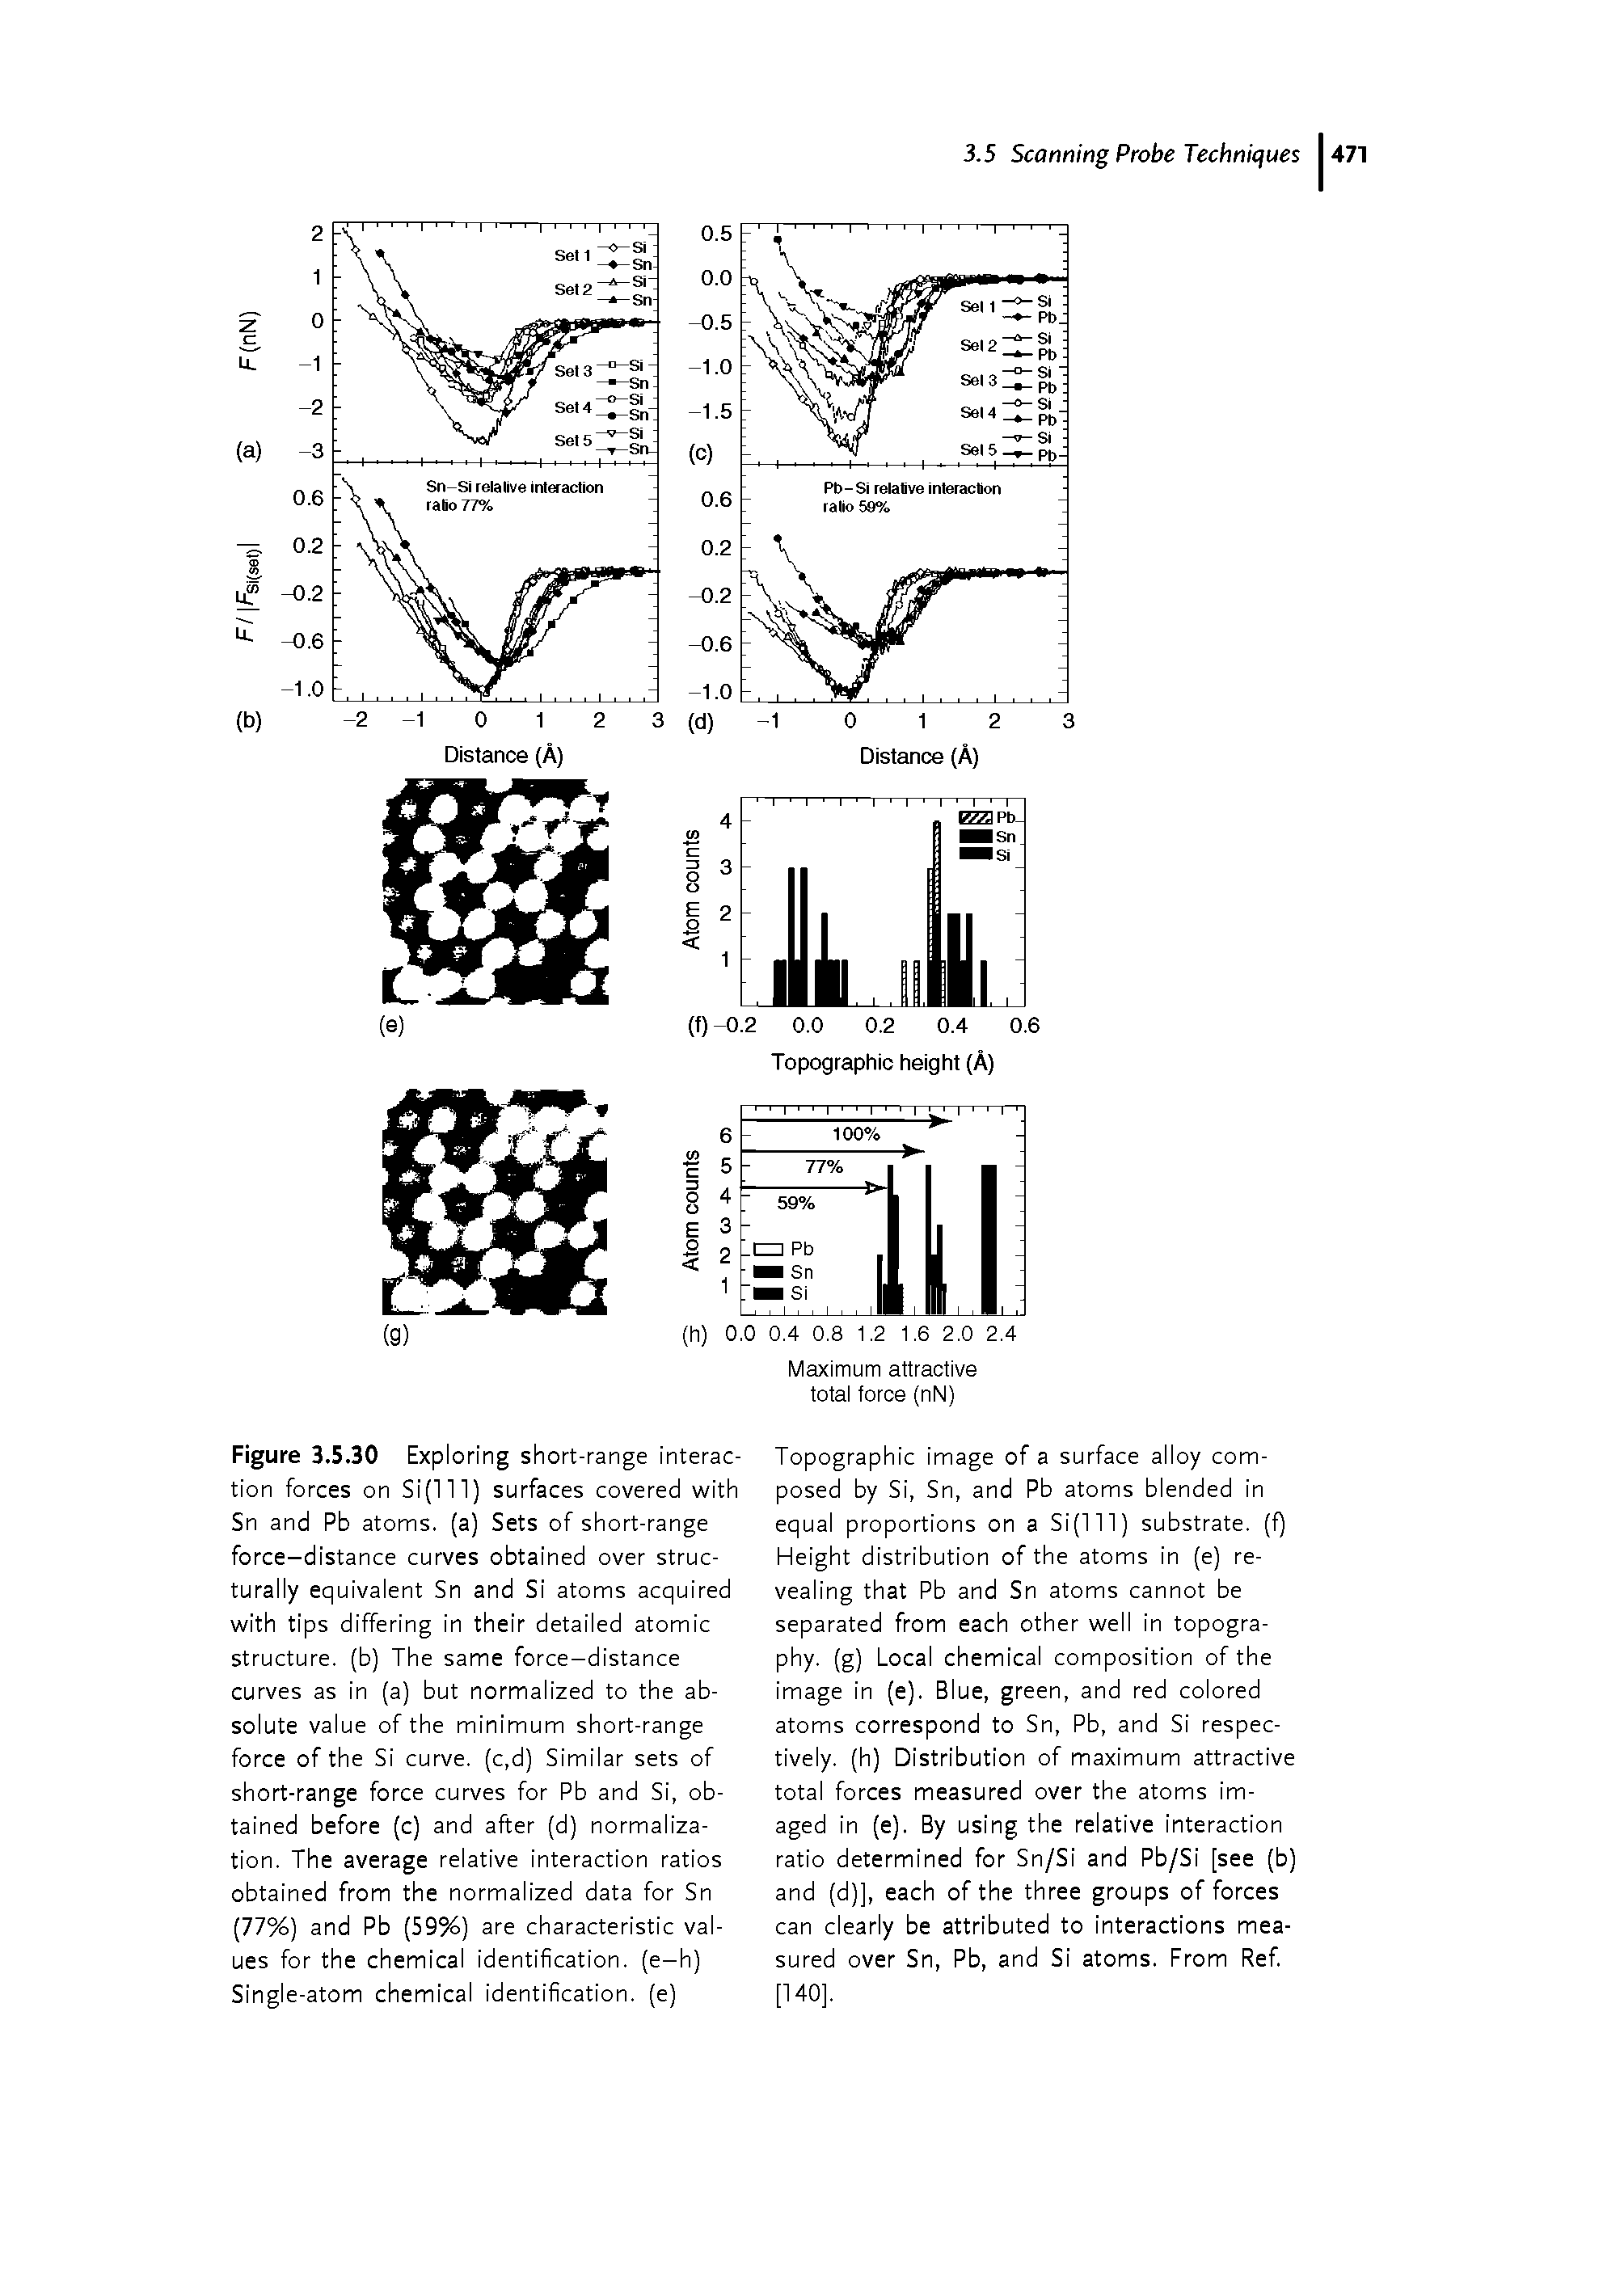 Figure 3.5.30 Exploring short-range interaction forces on Si(lll) surfaces covered with Sn and Pb atoms, (a) Sets of short-range force-distance curves obtained over structurally equivalent Sn and Si atoms acquired with tips differing in their detailed atomic structure, (b) The same force-distance curves as in (a) but normalized to the absolute value of the minimum short-range force of the Si curve. (c,d) Similar sets of short-range force curves for Pb and Si, obtained before (c) and after (d) normalization. The average relative interaction ratios obtained from the normalized data for Sn (77%) and Pb (59%) are characteristic val-tfes for the chemical identification, (e-h) Single-atom chemical identification, (e)...